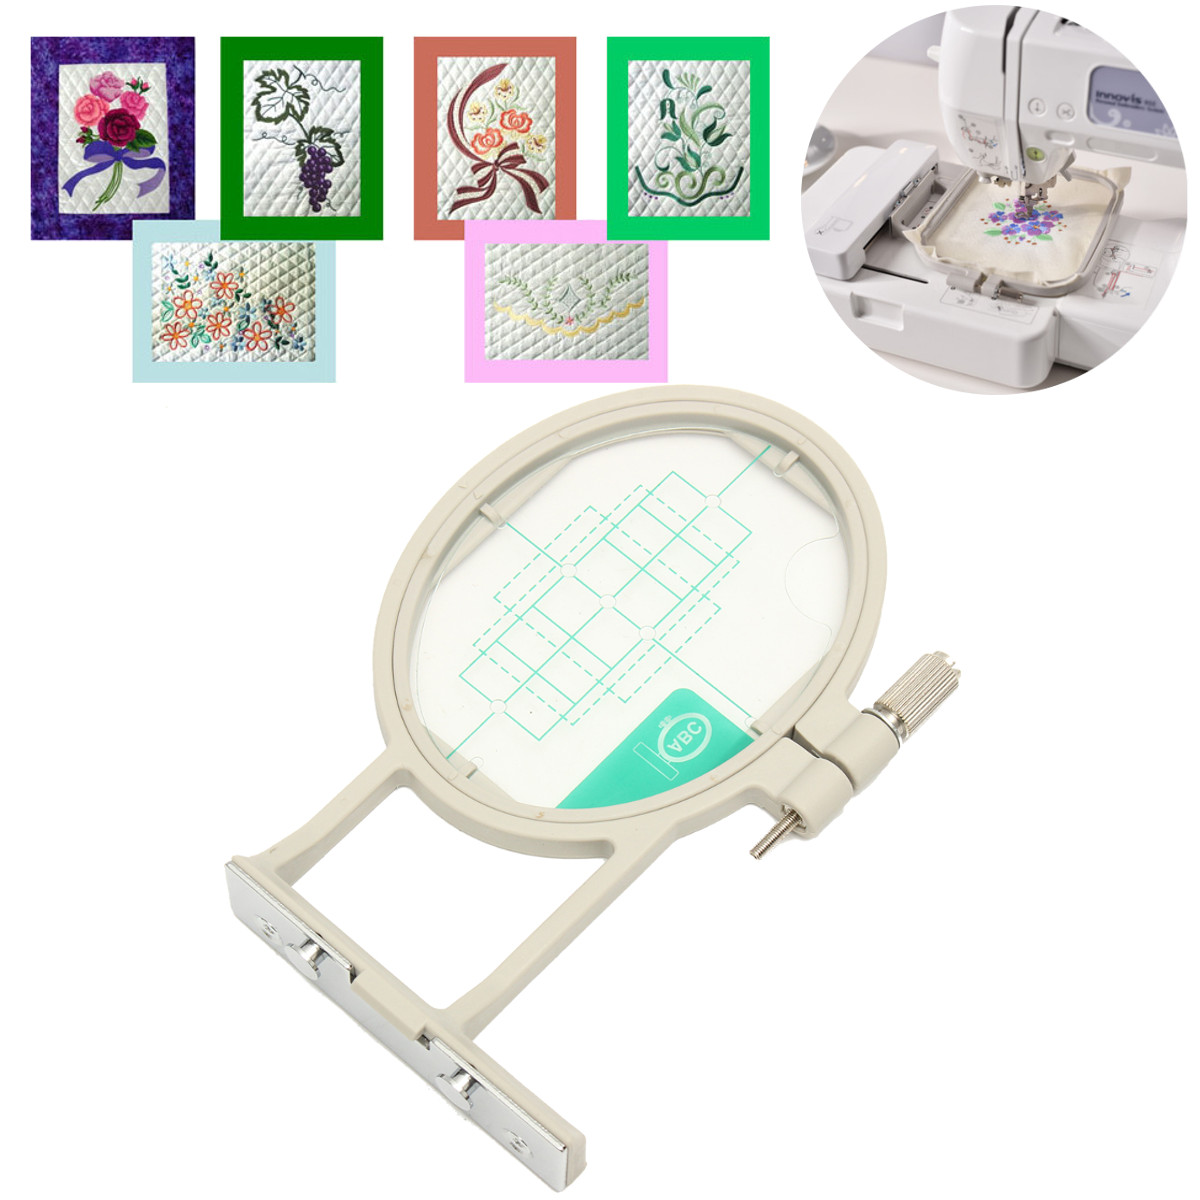 Small Embroidery Hoop for Brother SE400 PE500 LB6800 Machine - Replaces